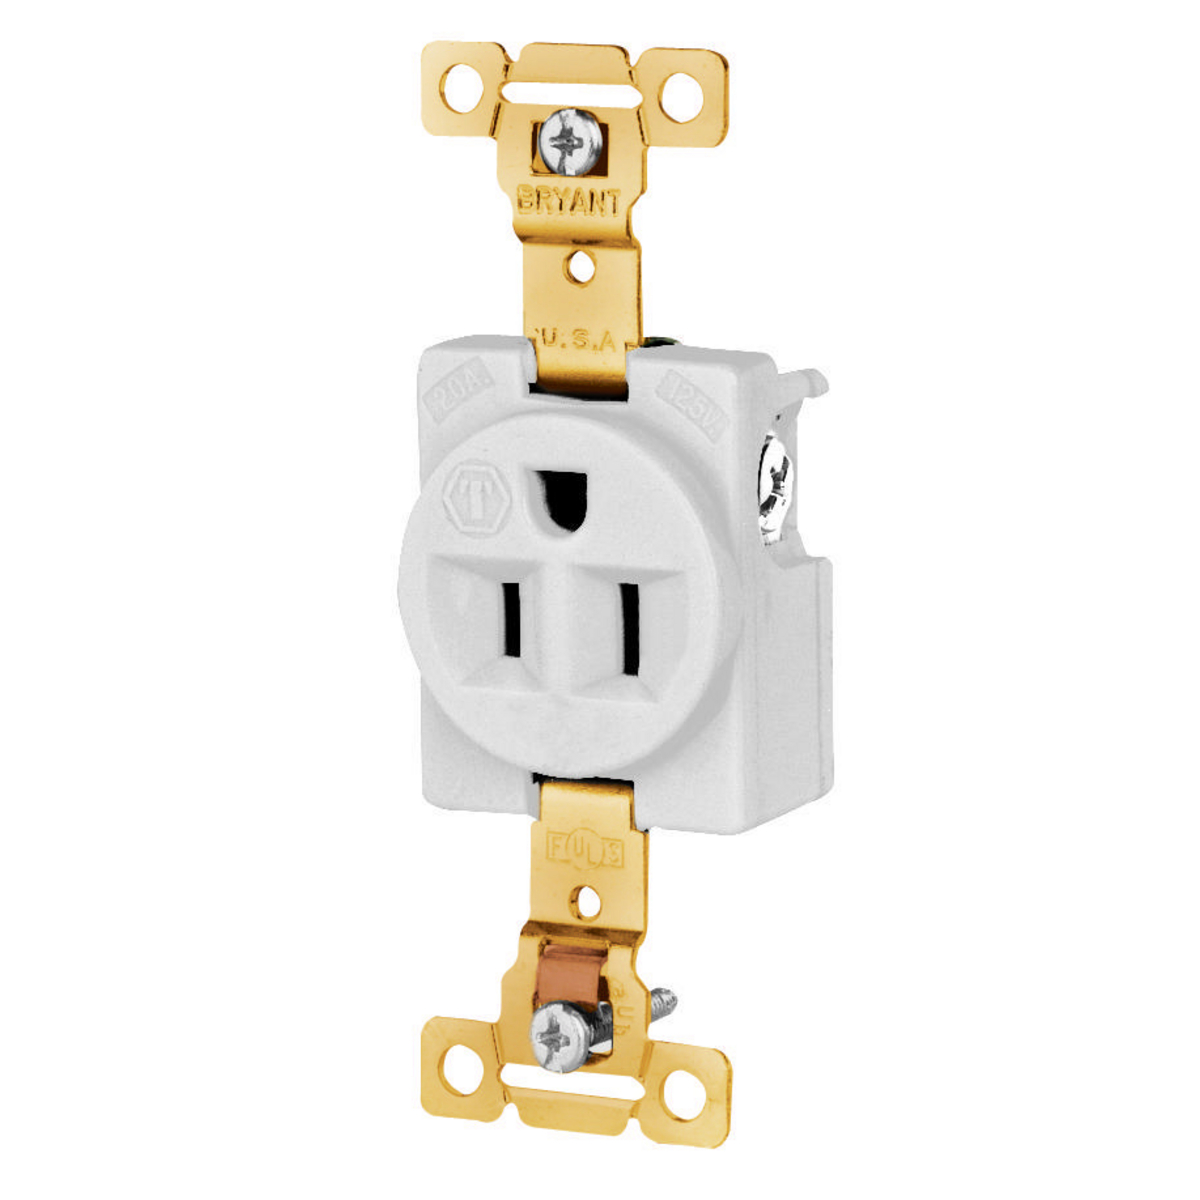 Details about   NEW HUBBELL 5261 BROWN SINGLE RECEPTACLE 15 AMP 125V 